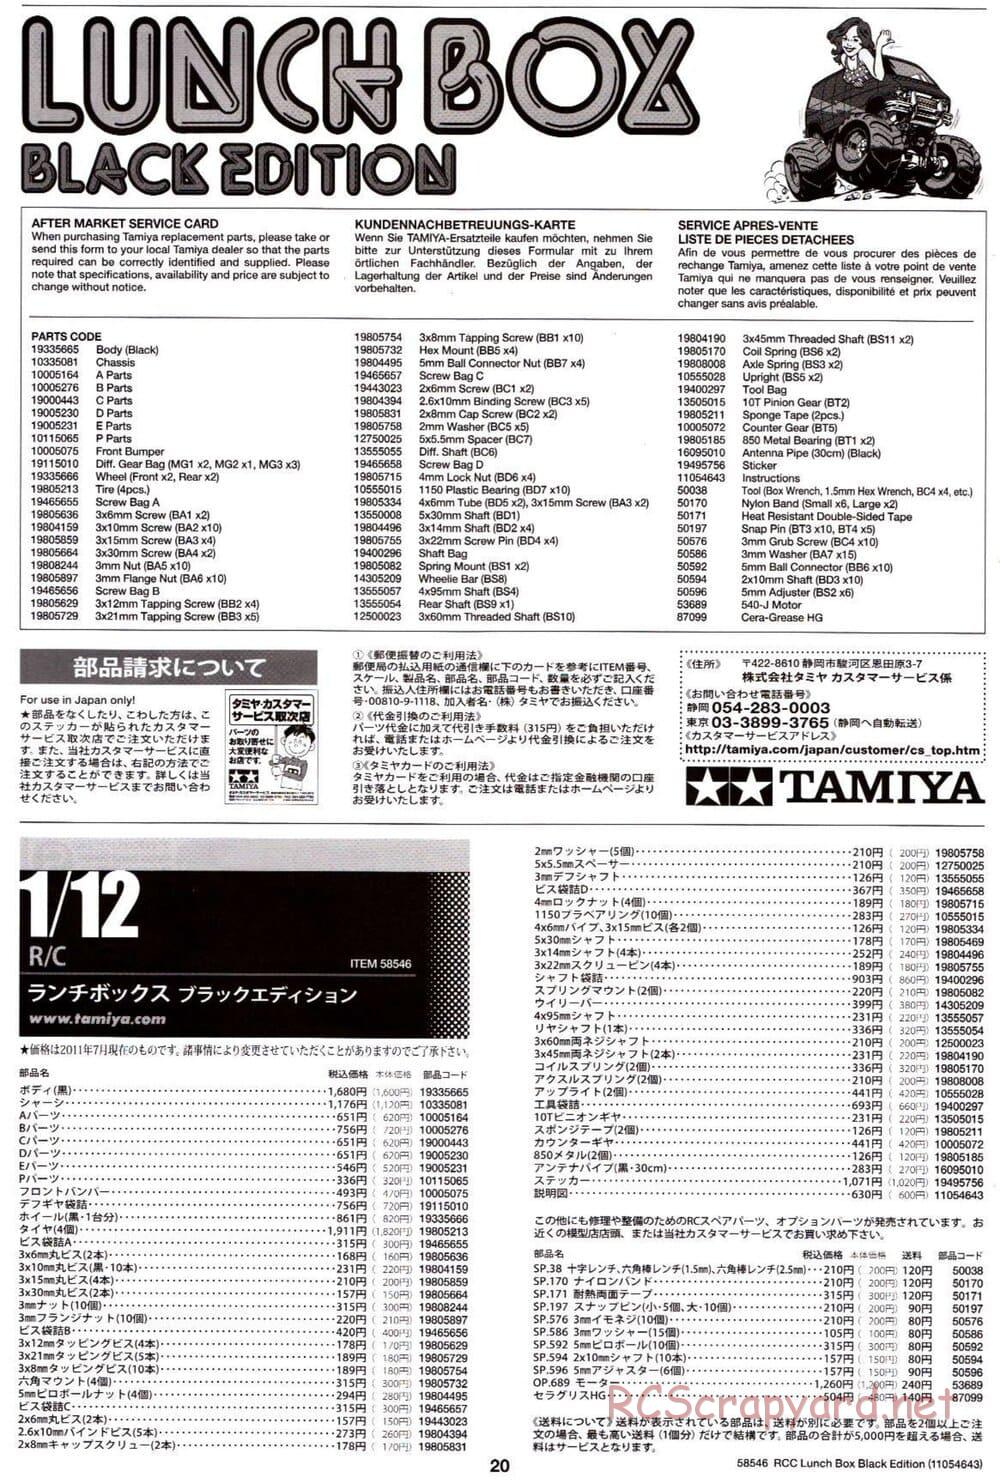 Tamiya - Lunch Box - Black Edition - CW-01 Chassis - Manual - Page 20